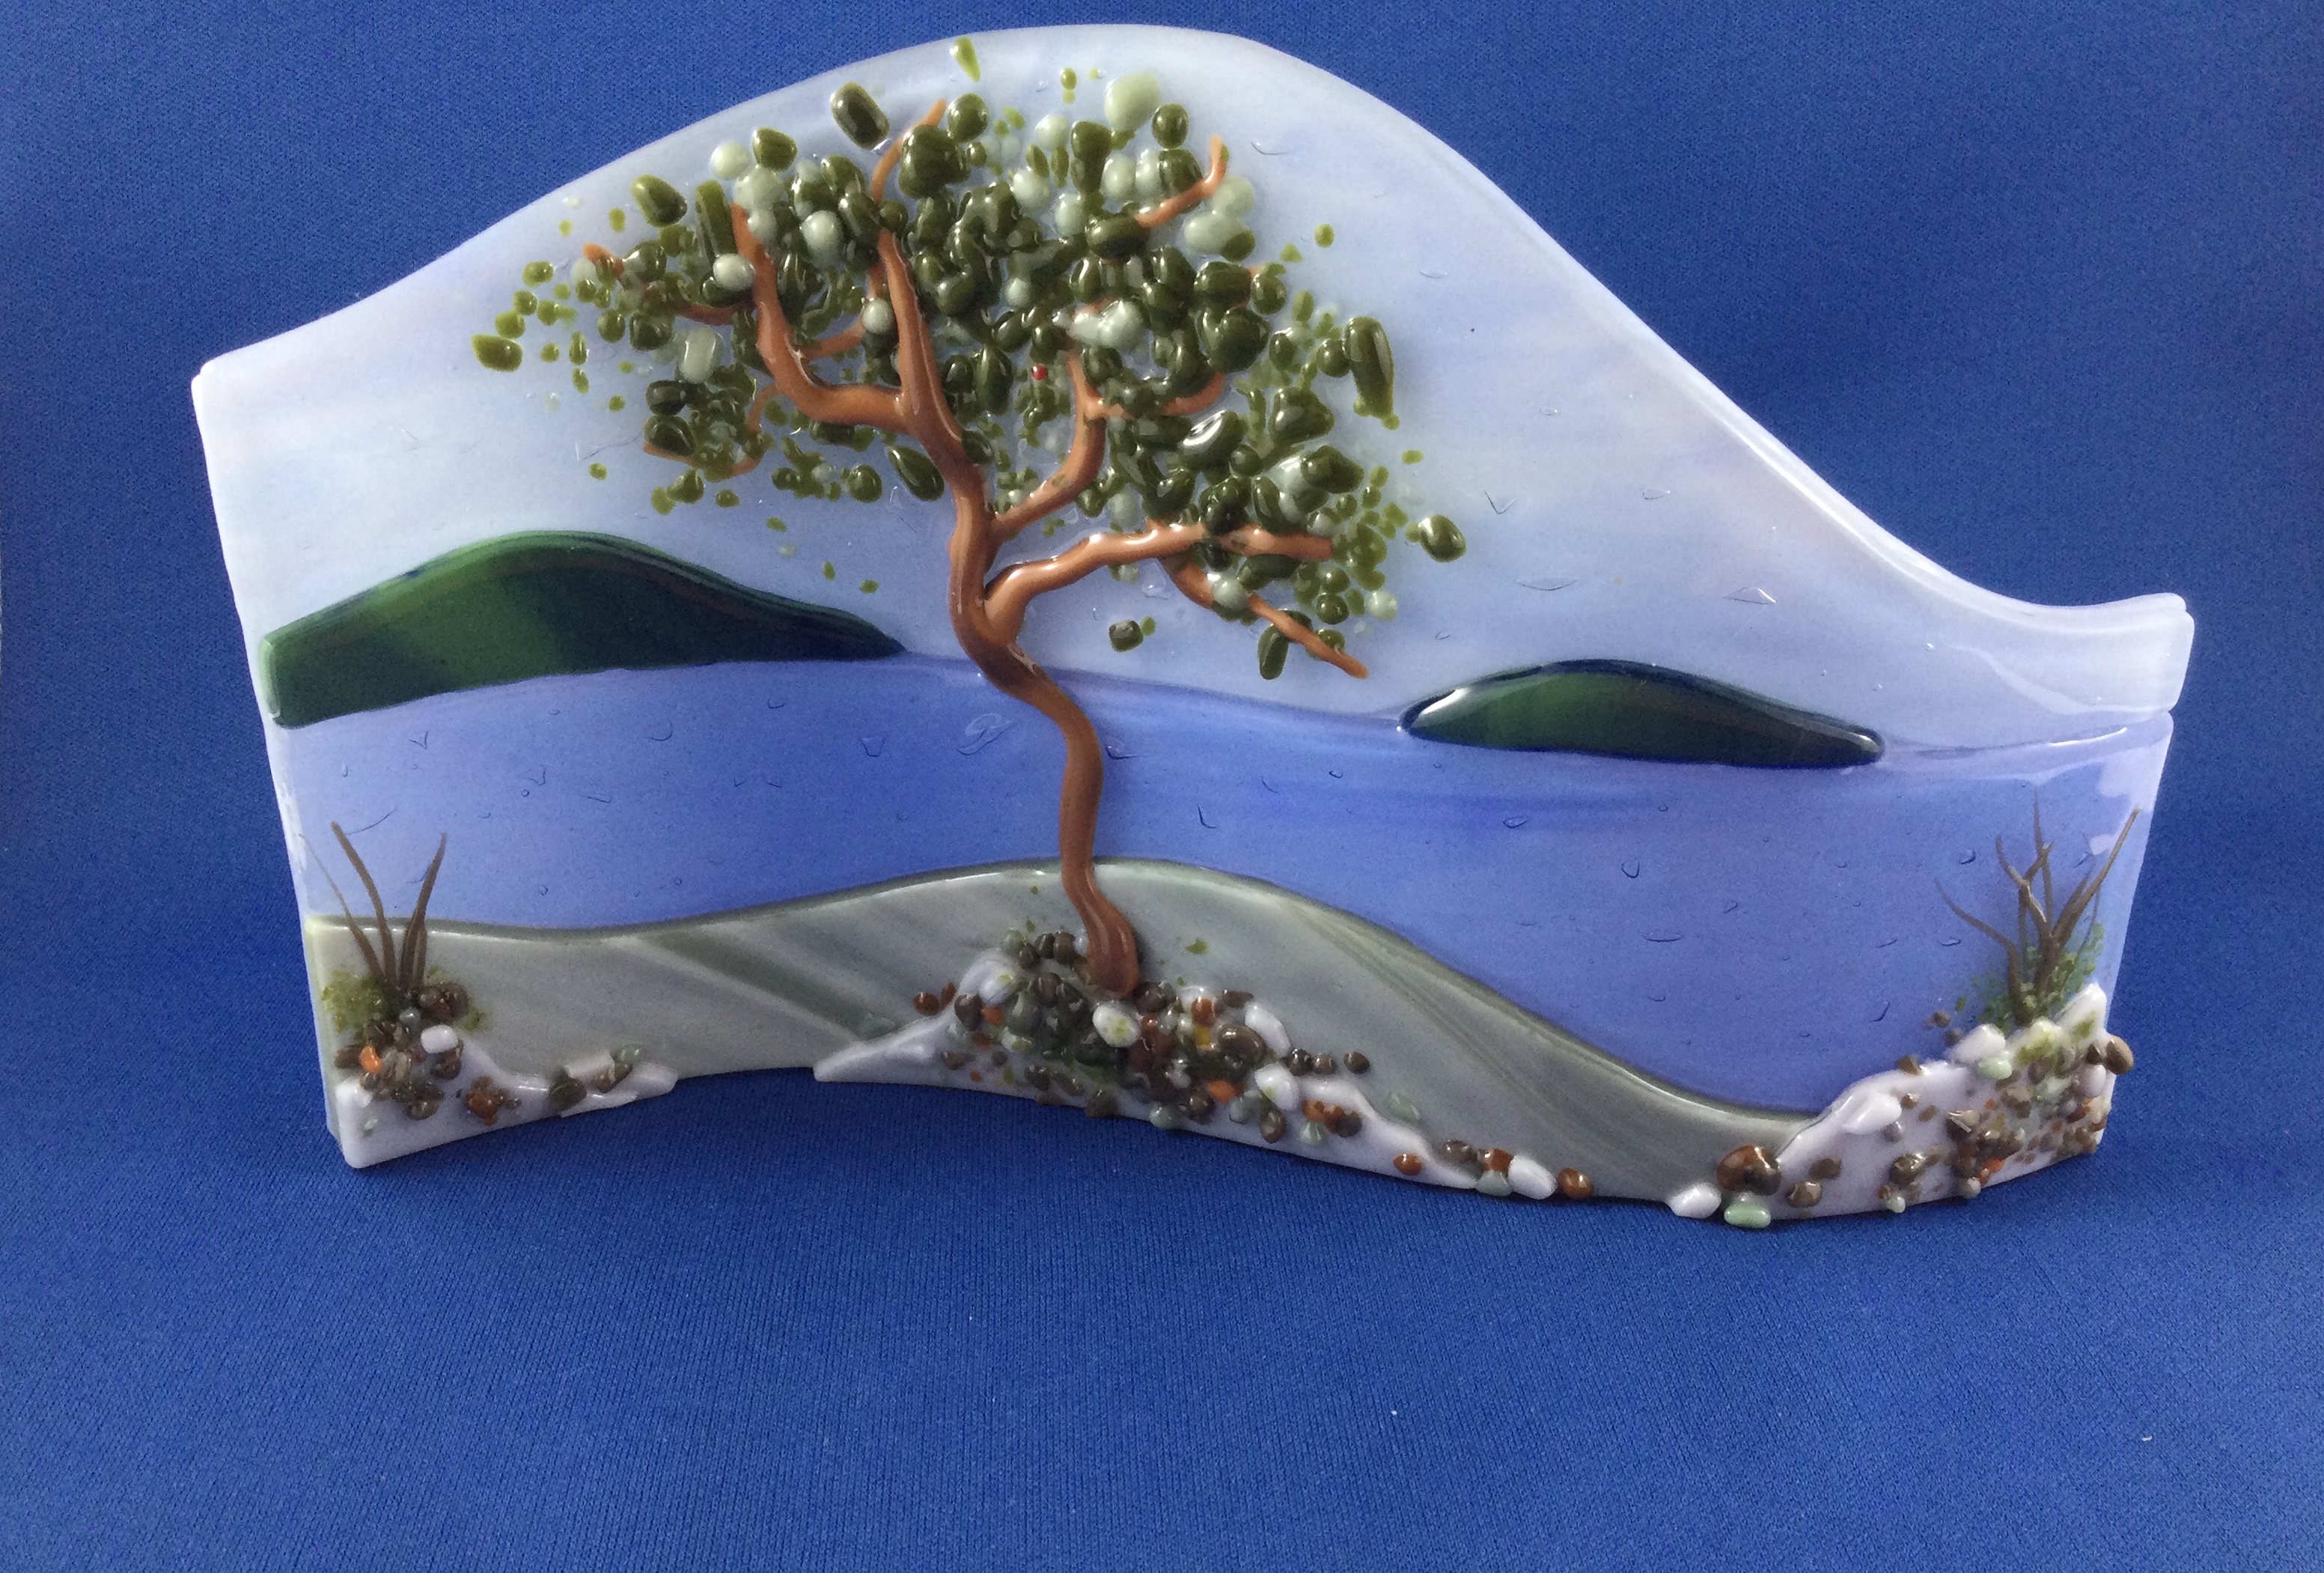 Arbutus on Shore - fused glass landscape curved scene.